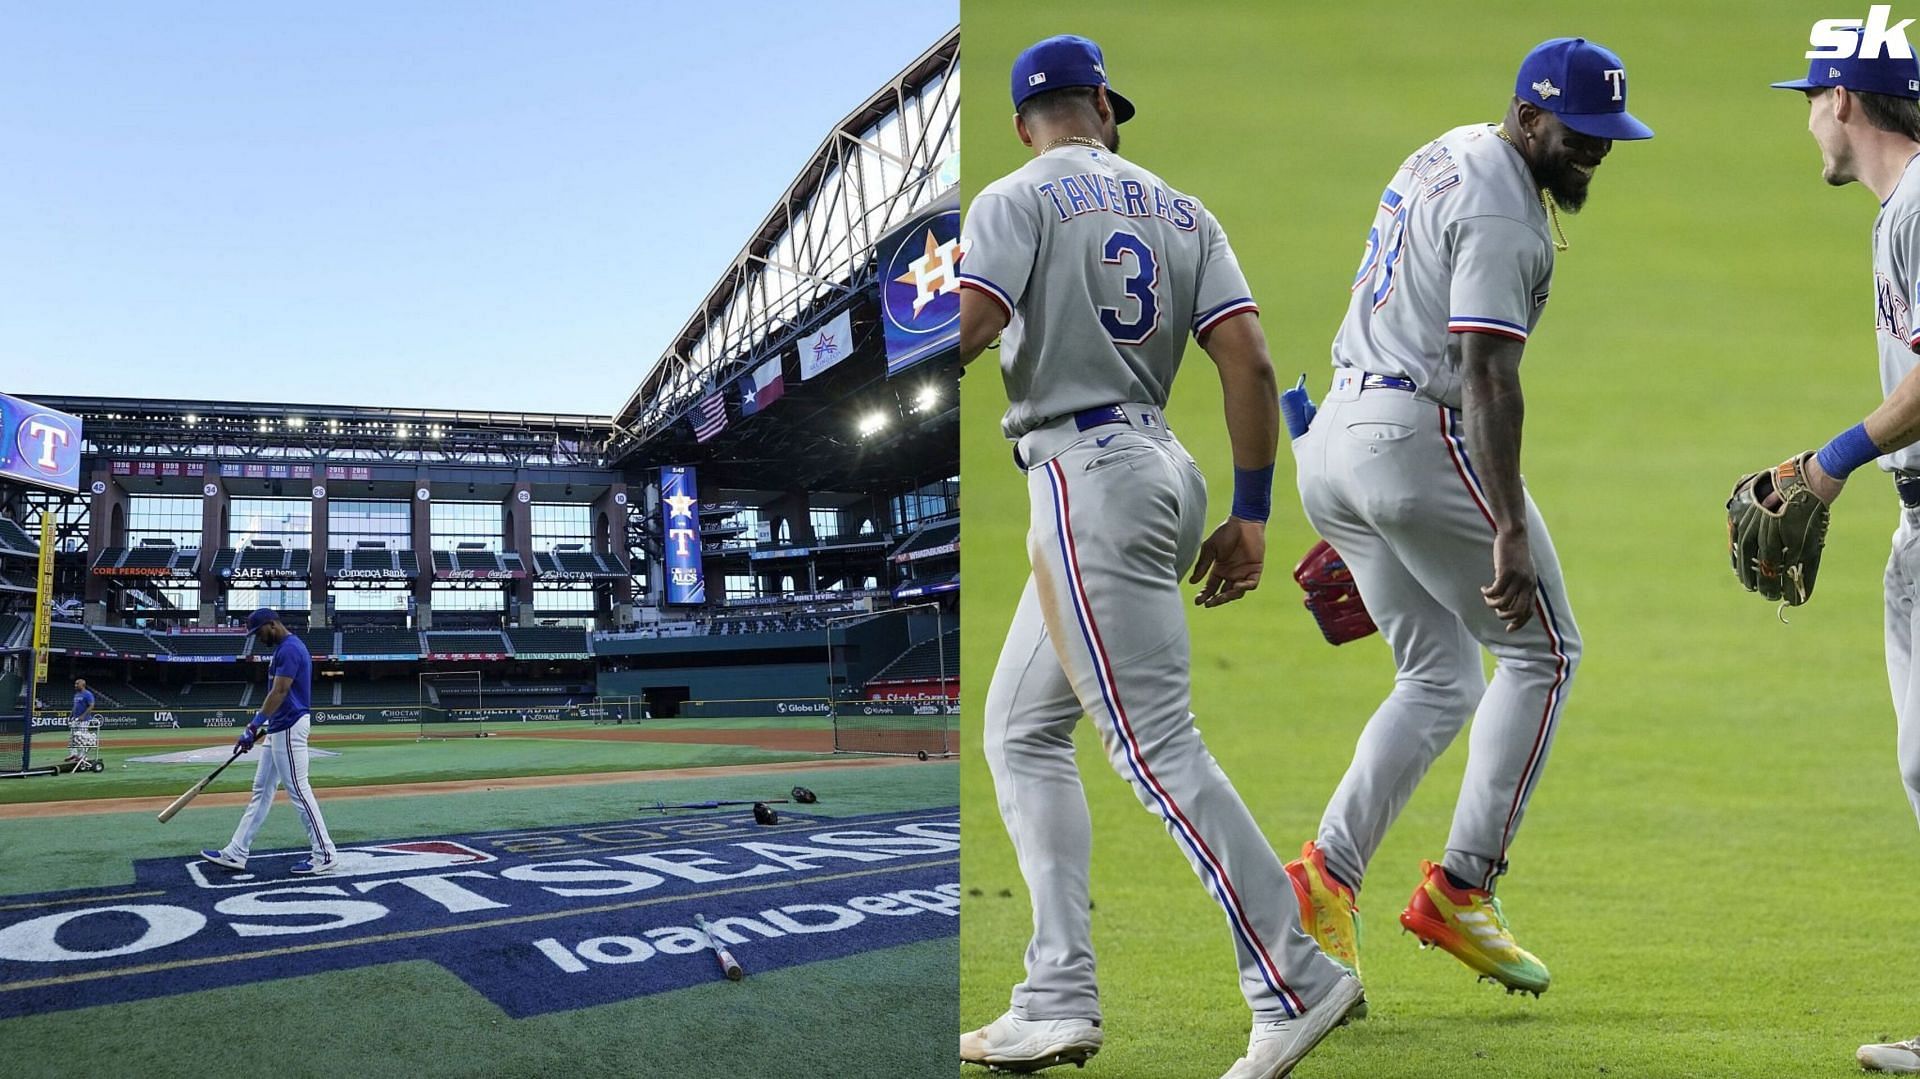 Famous fans take in Rangers-Astros Game 3 in Arlington